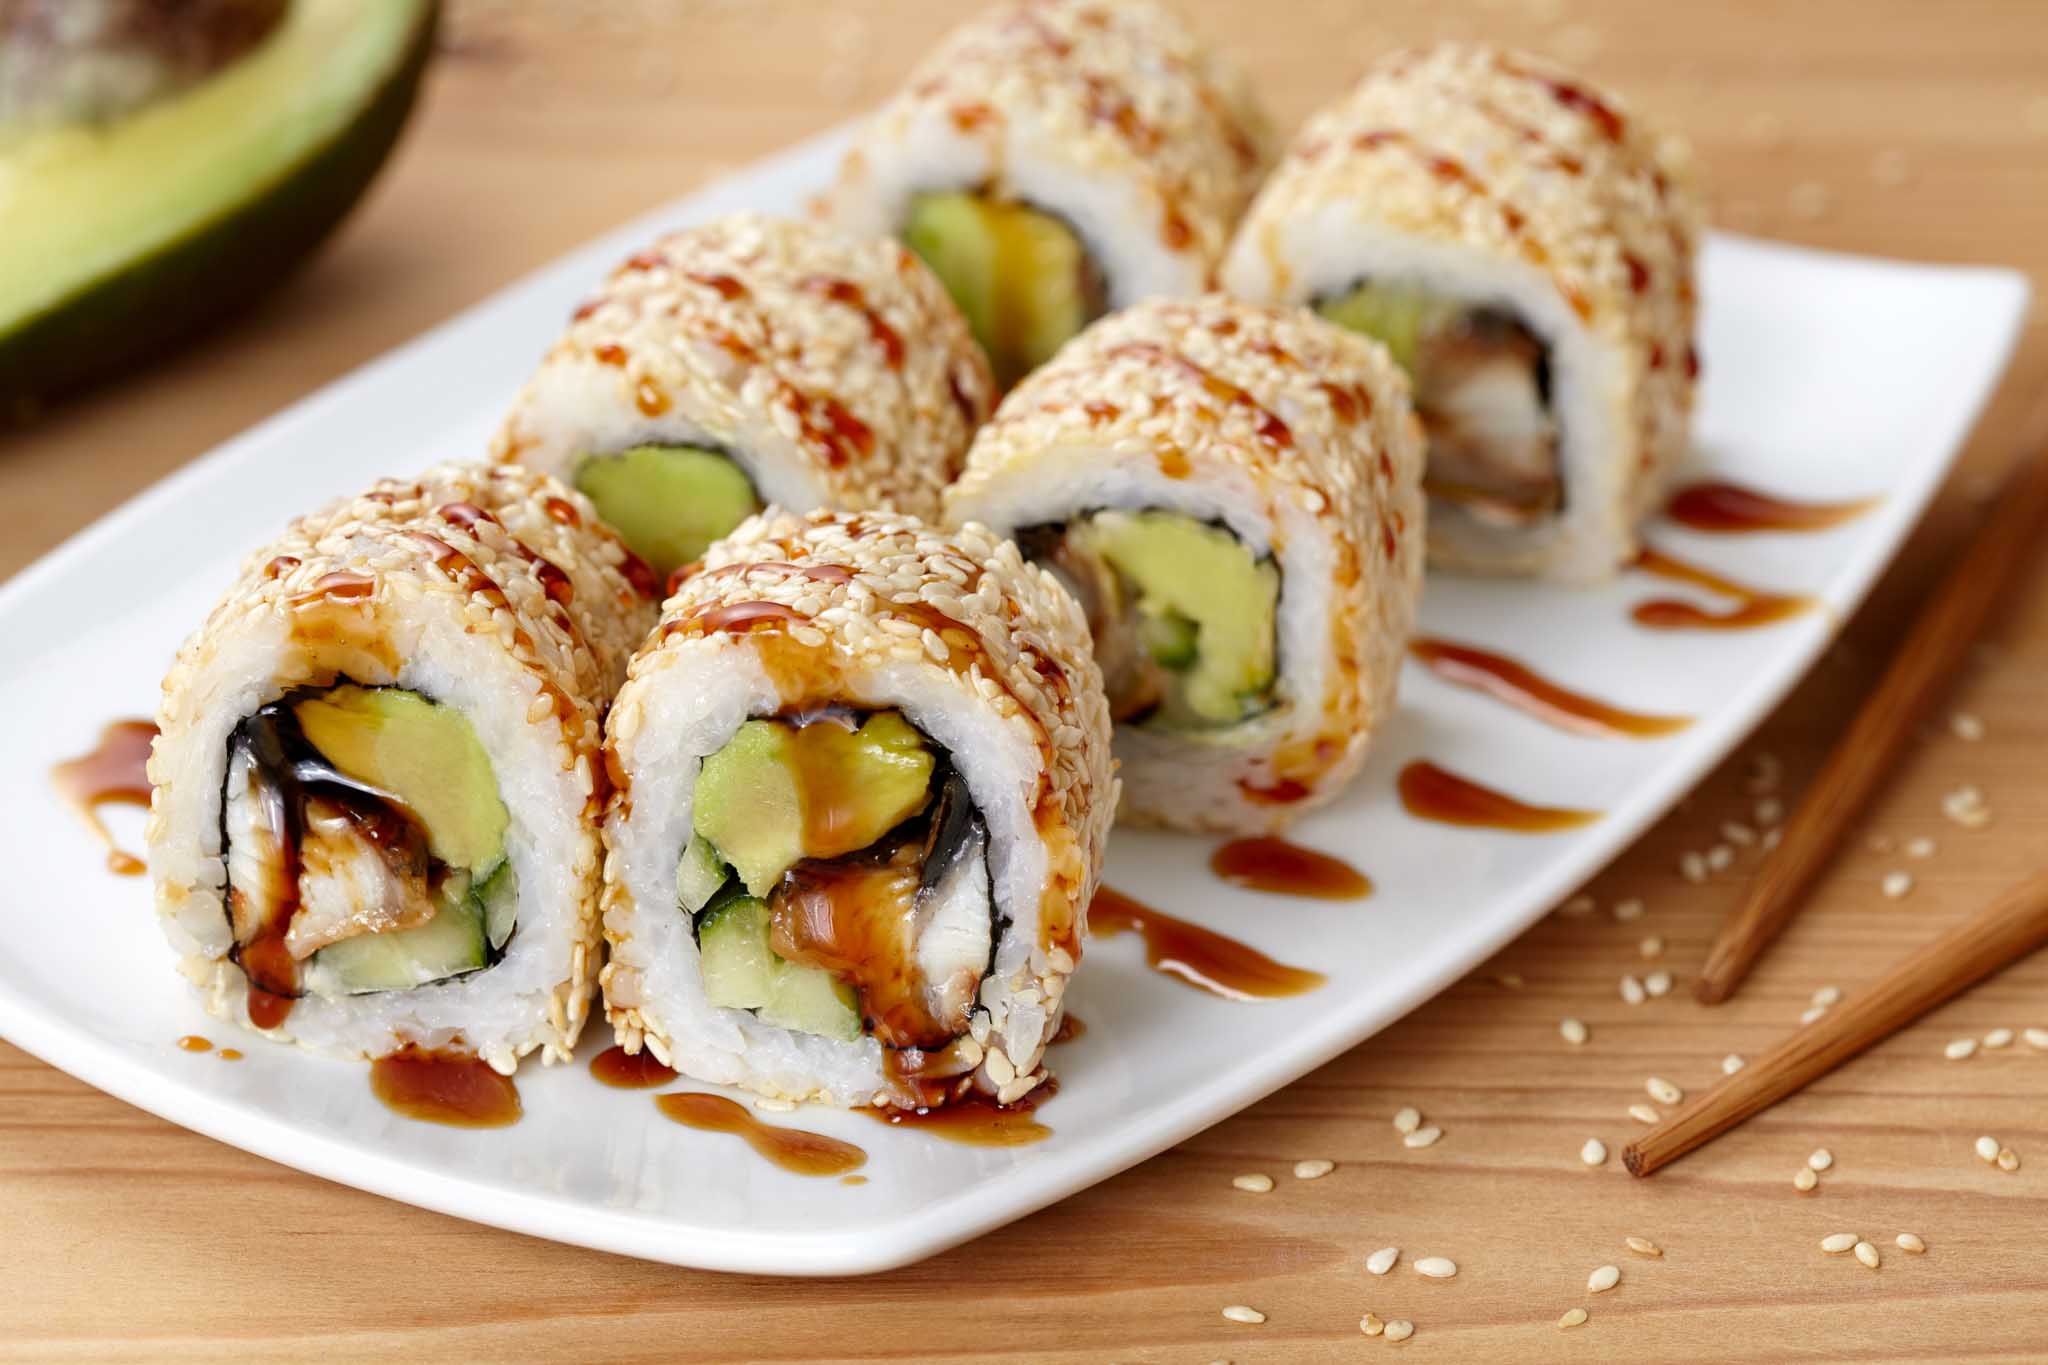 Fresh california rolls with avocado at The Real Food Academy.